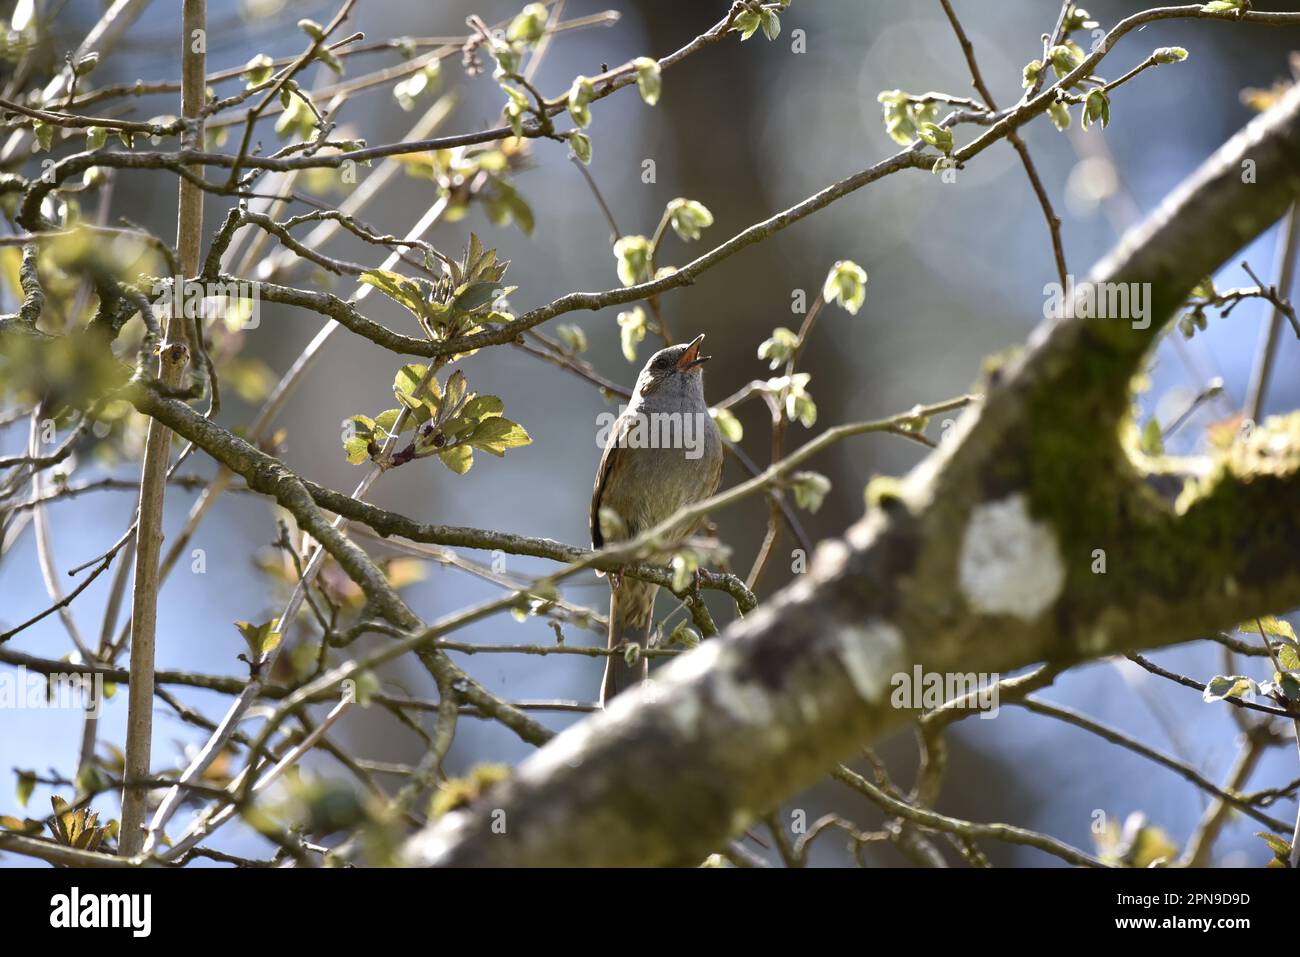 Singing Dunnock (Prunella modularis) Perched Among Sunlit Twigs, Facing Camera, with Head Skywards against a Dappled Blue Sky and Twigs Background, UK Stock Photo